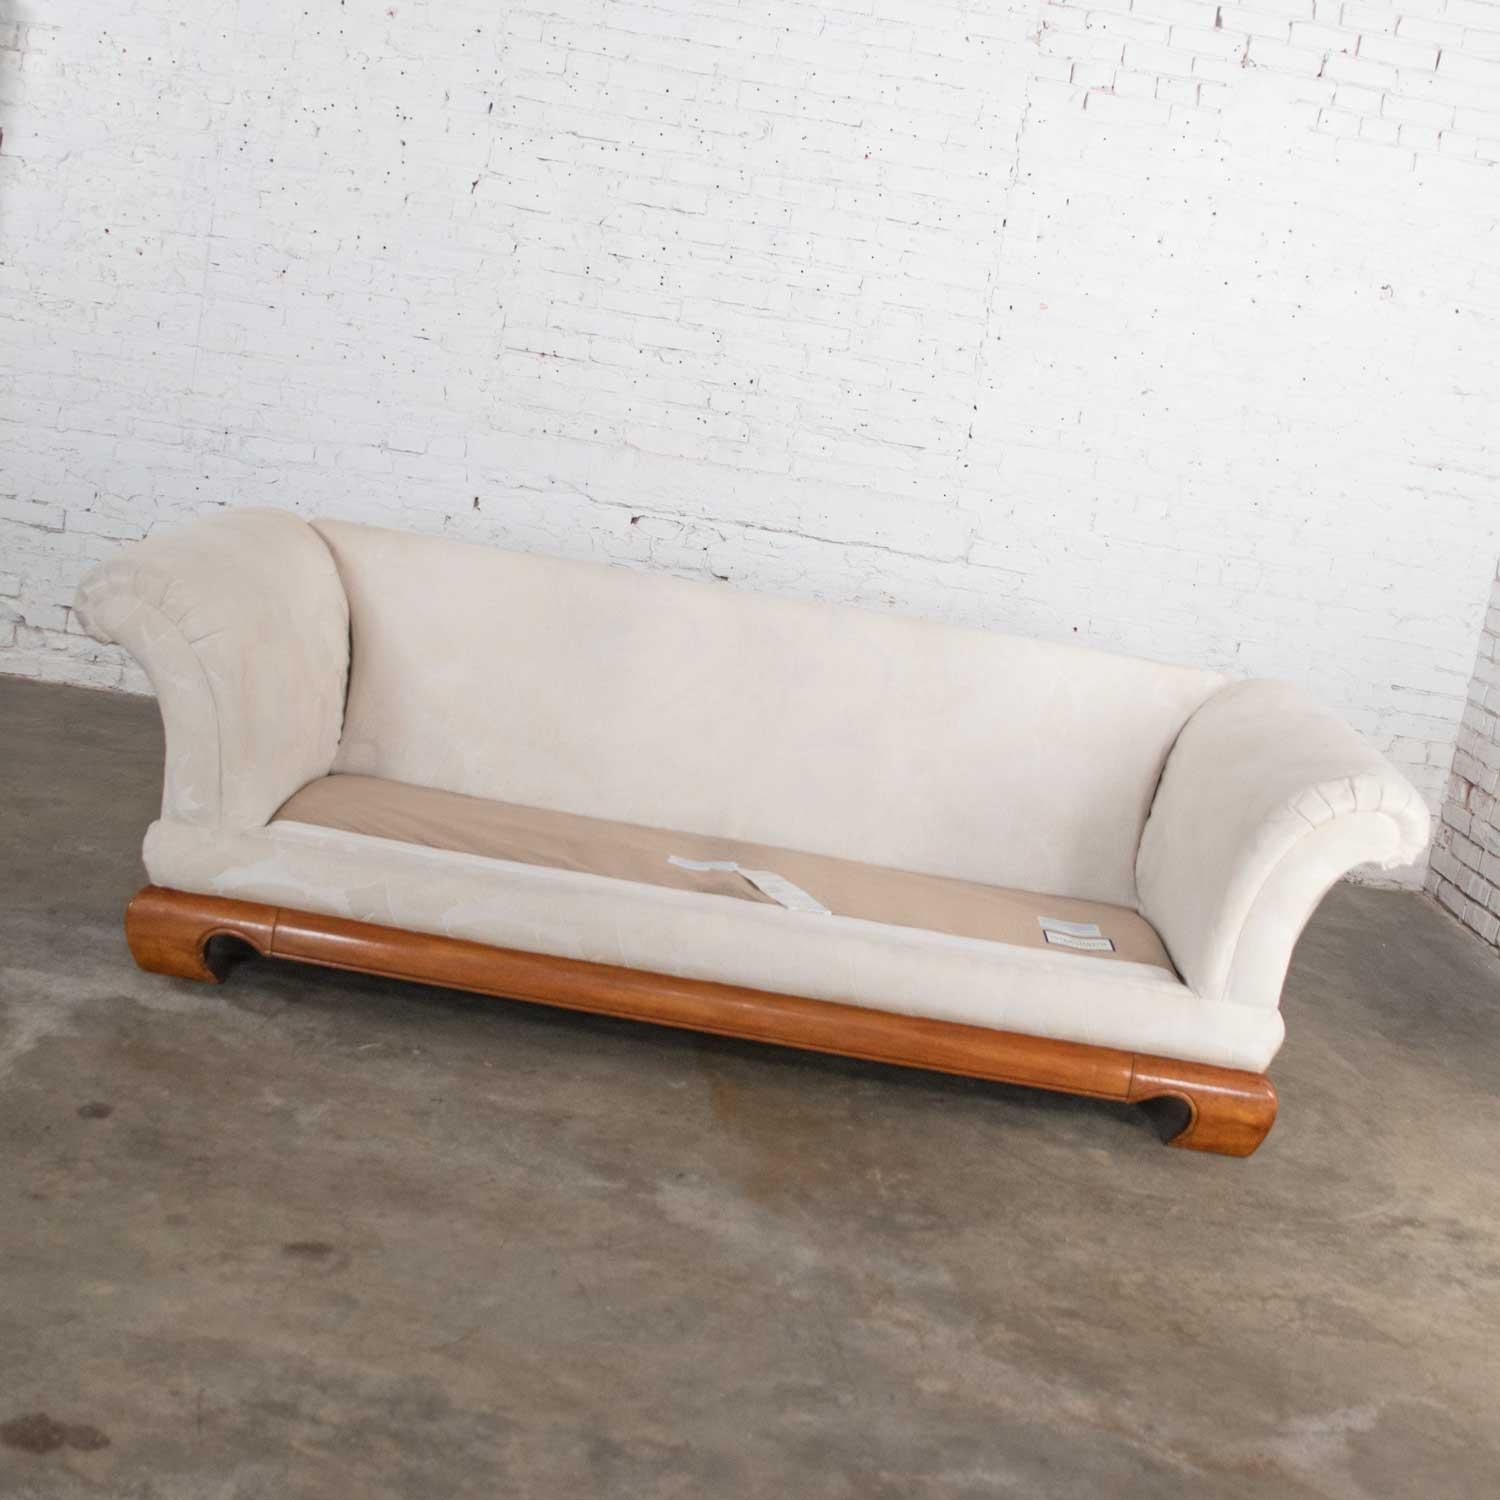 Chinoiserie Chow Leg Ming Style Sofa by Schnadig International Furniture 3